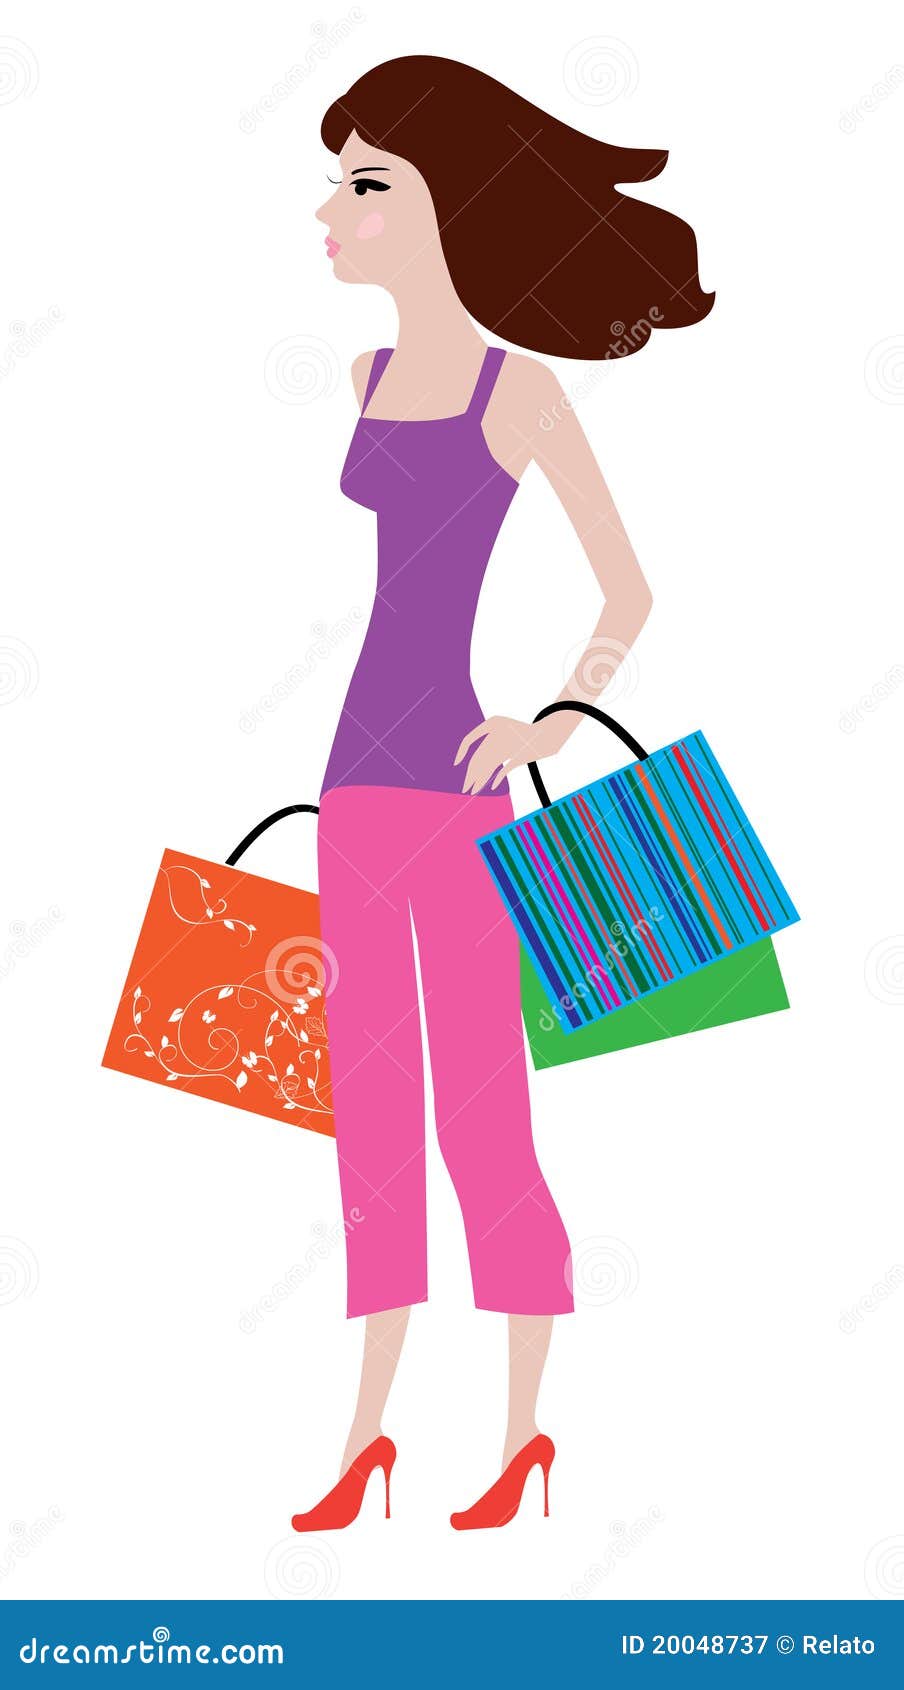 Shopping girl stock vector. Illustration of abstract - 20048737